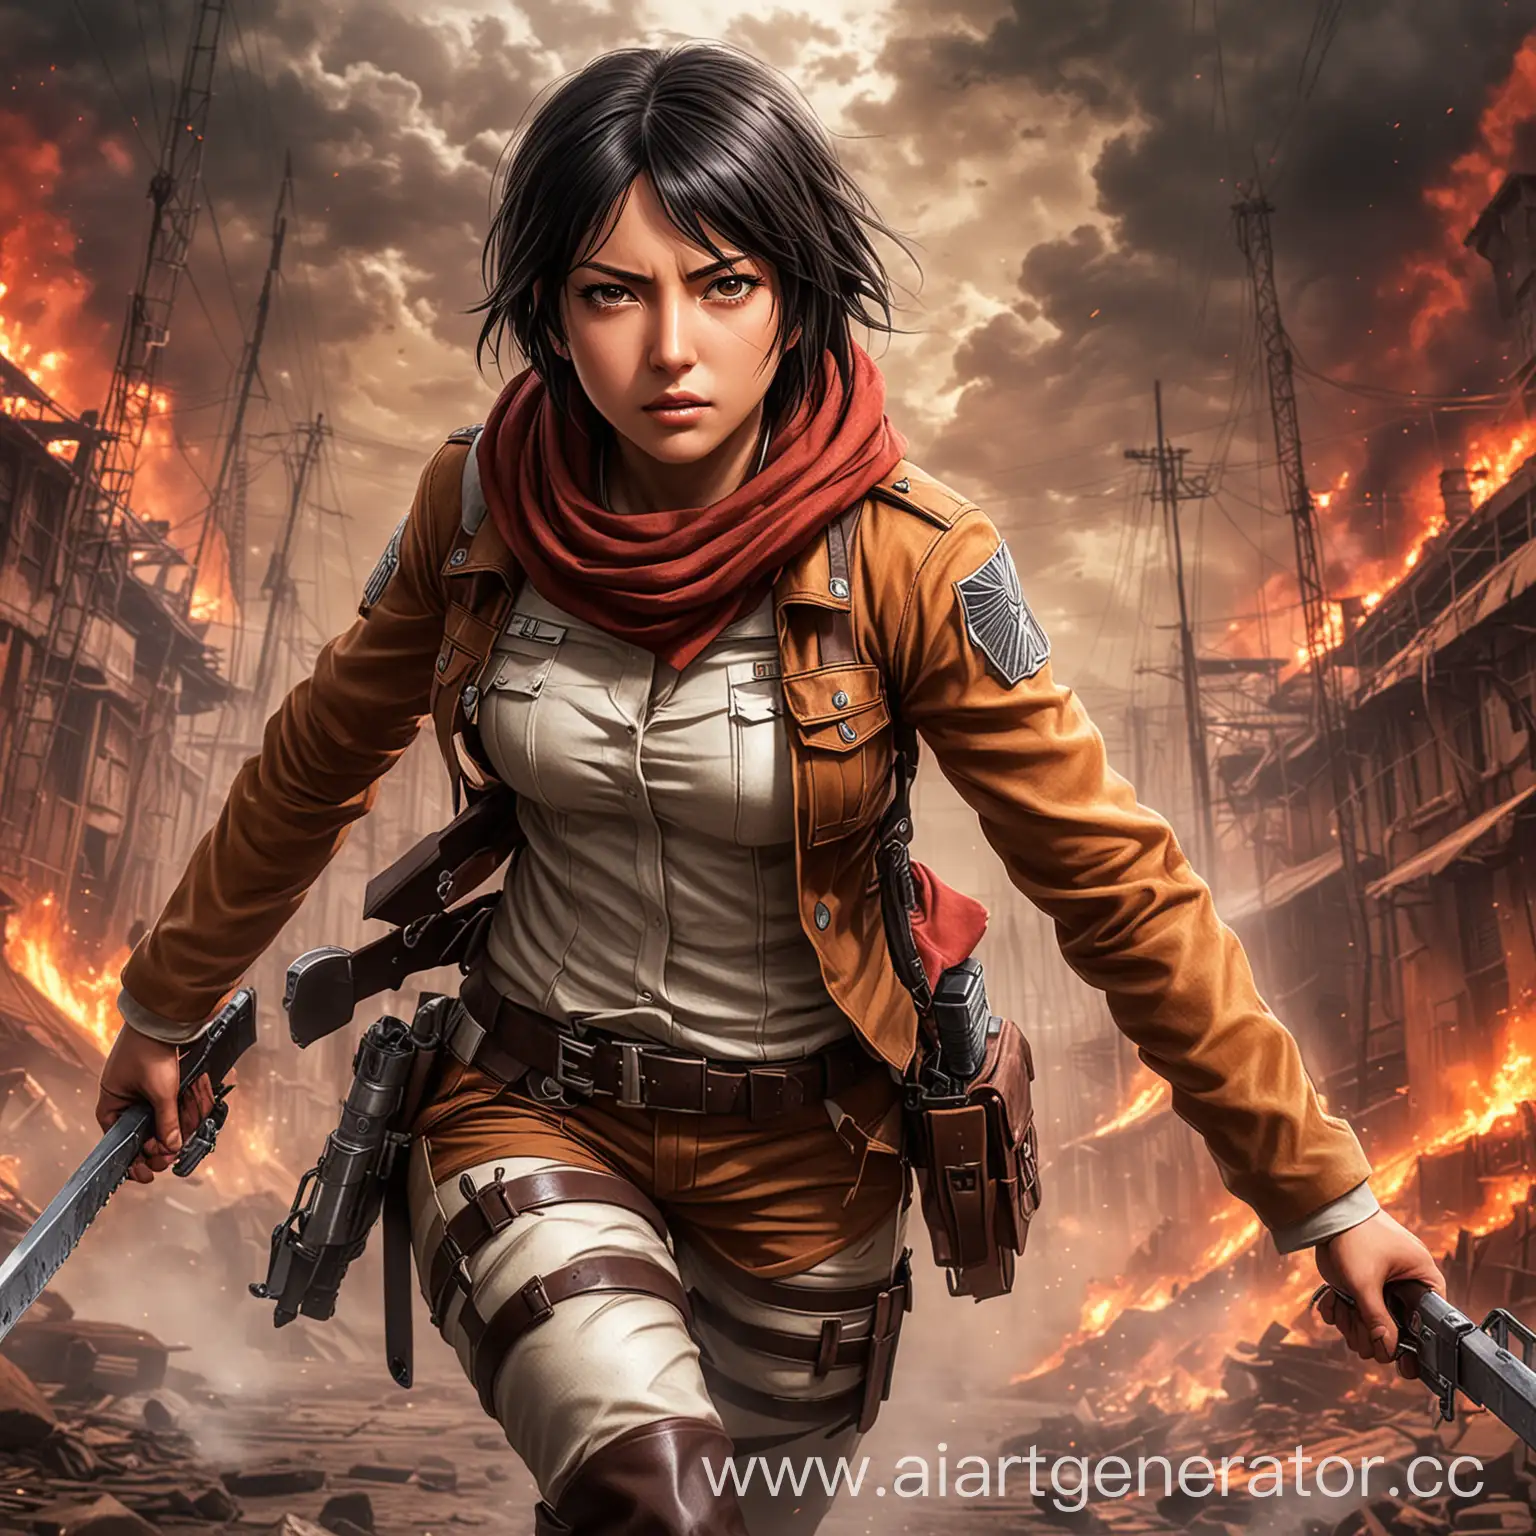 Mikasa Ackerman from Attack on Titan captured in mid-battle, Survey Corps uniform reflecting  she is the perfect combination of determination and grace, set against vibrant hues of an apocalyptic backdrop, with rich, deep colors emphasizing the intensity of the scene, digital painting, high dynamic range, ultra realistic, dramatic lighting.